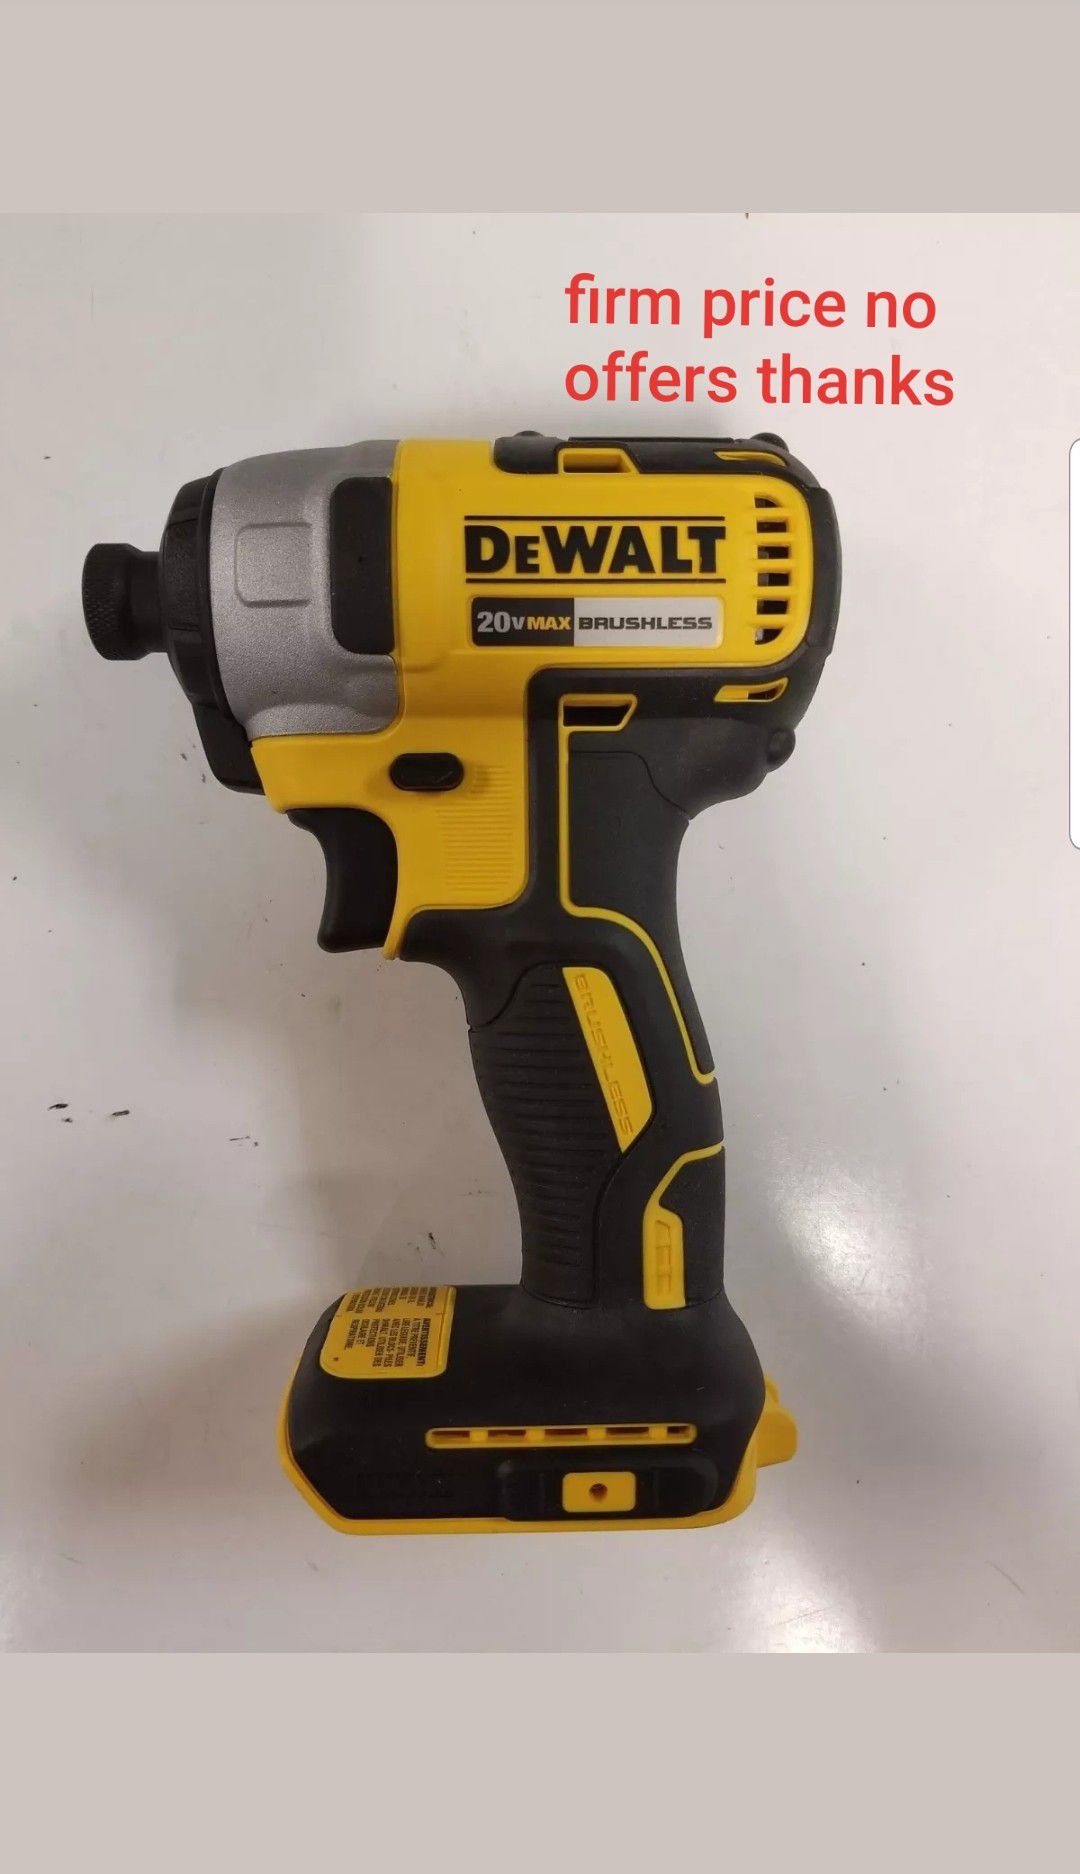 Dewalt dcf787b brushless motor  1/4" impact Driver battery or charger not included